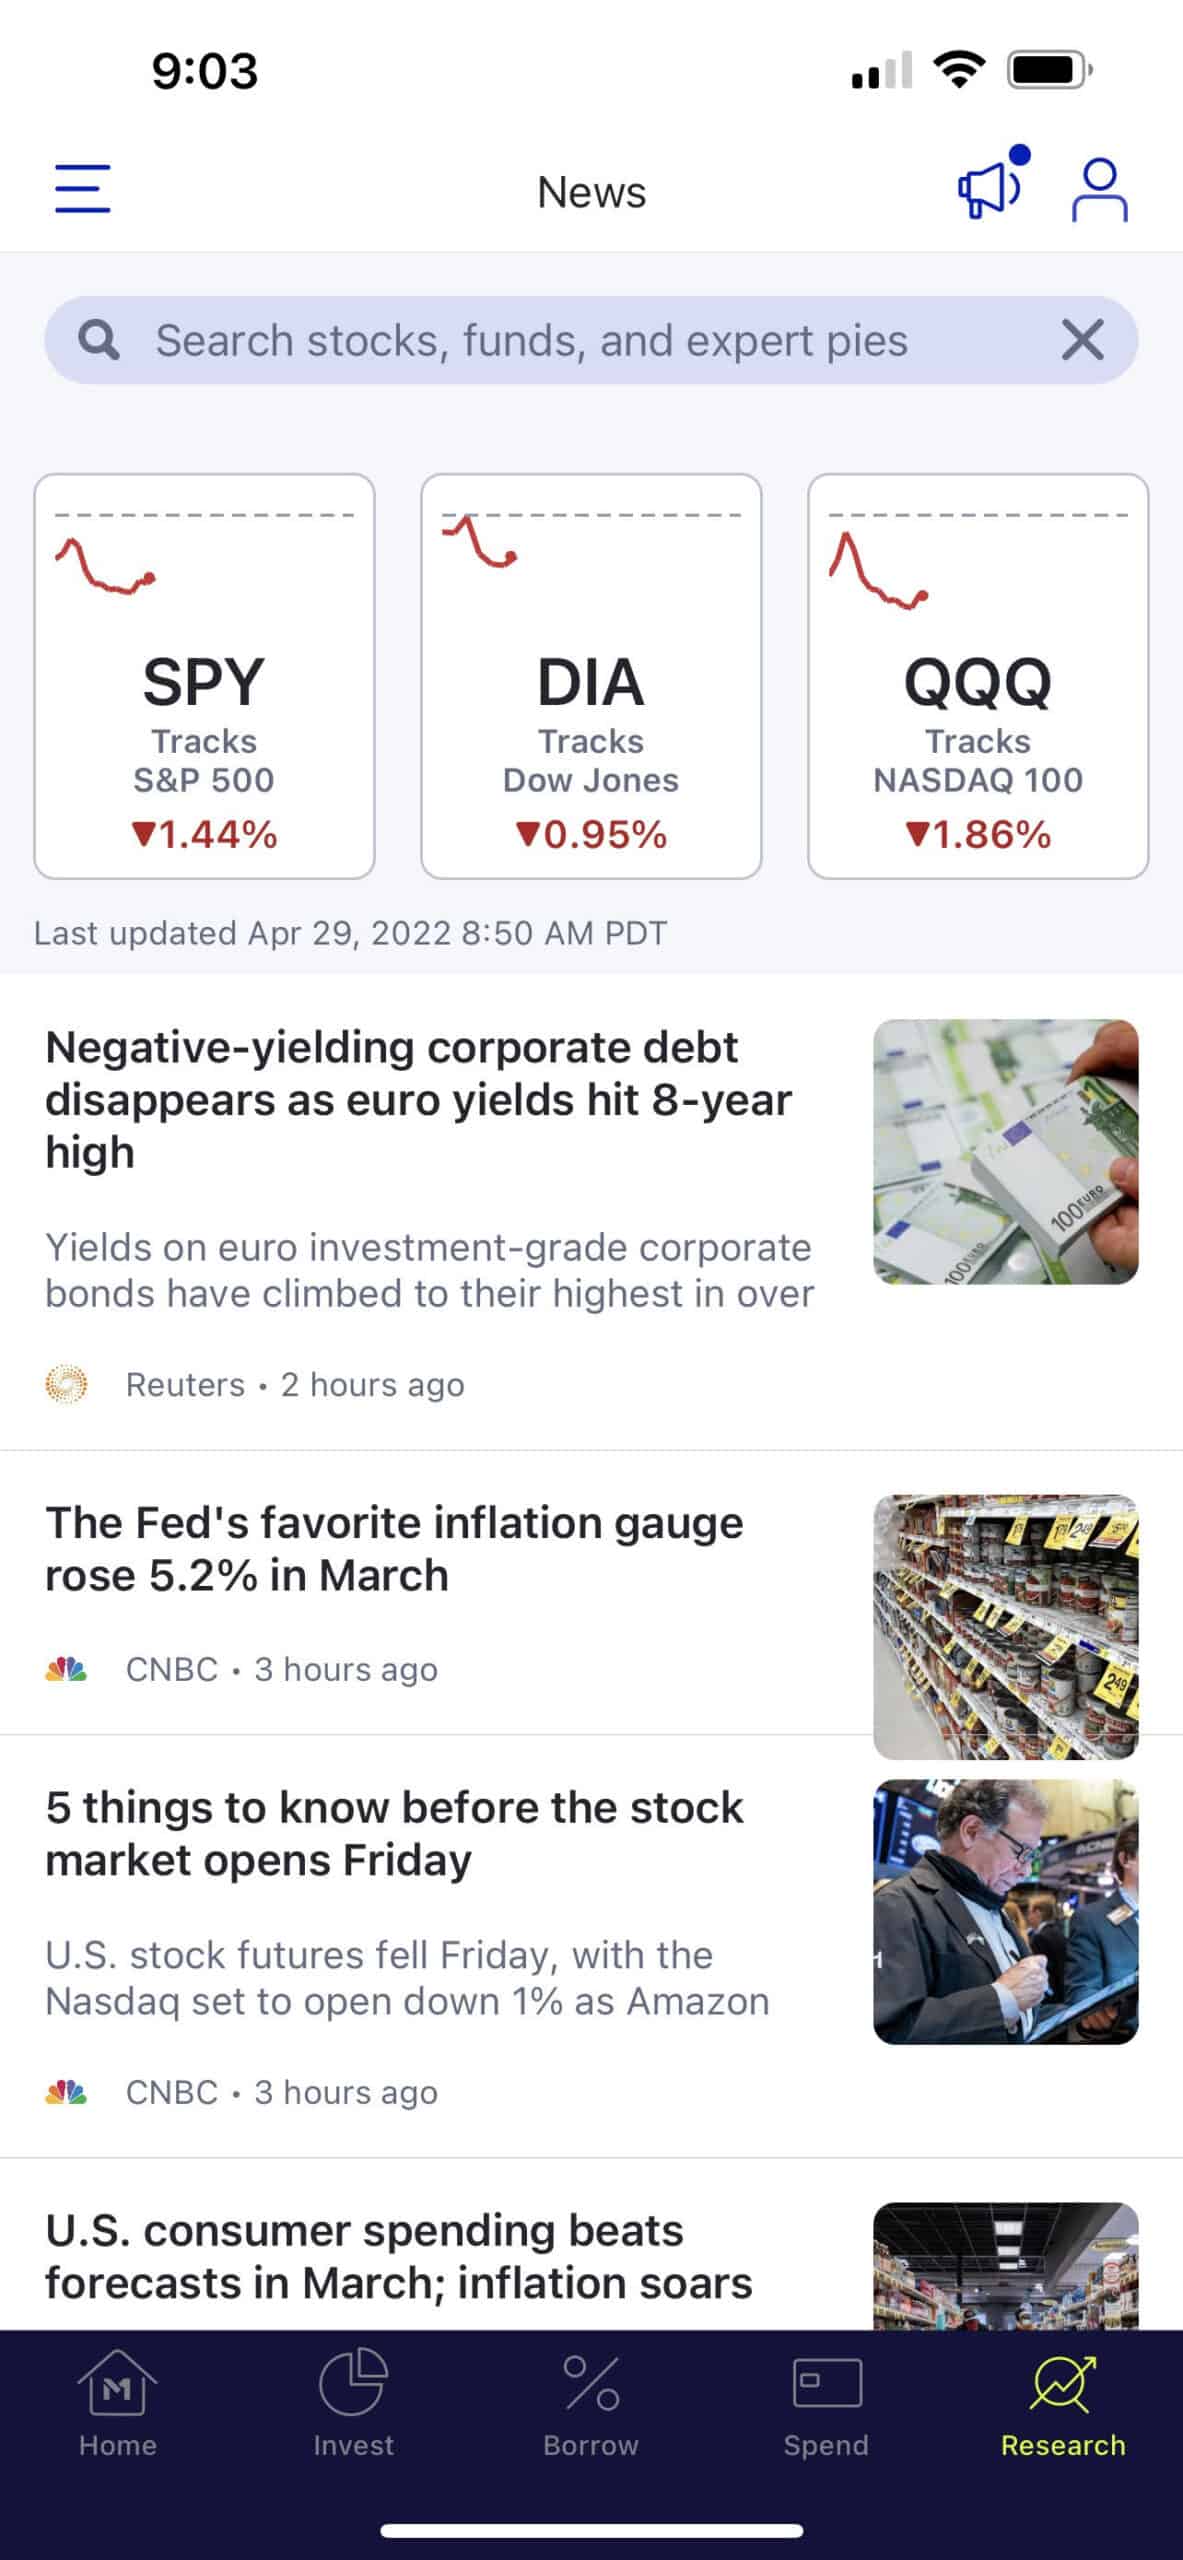 M1 finance research tab screenshot from the app